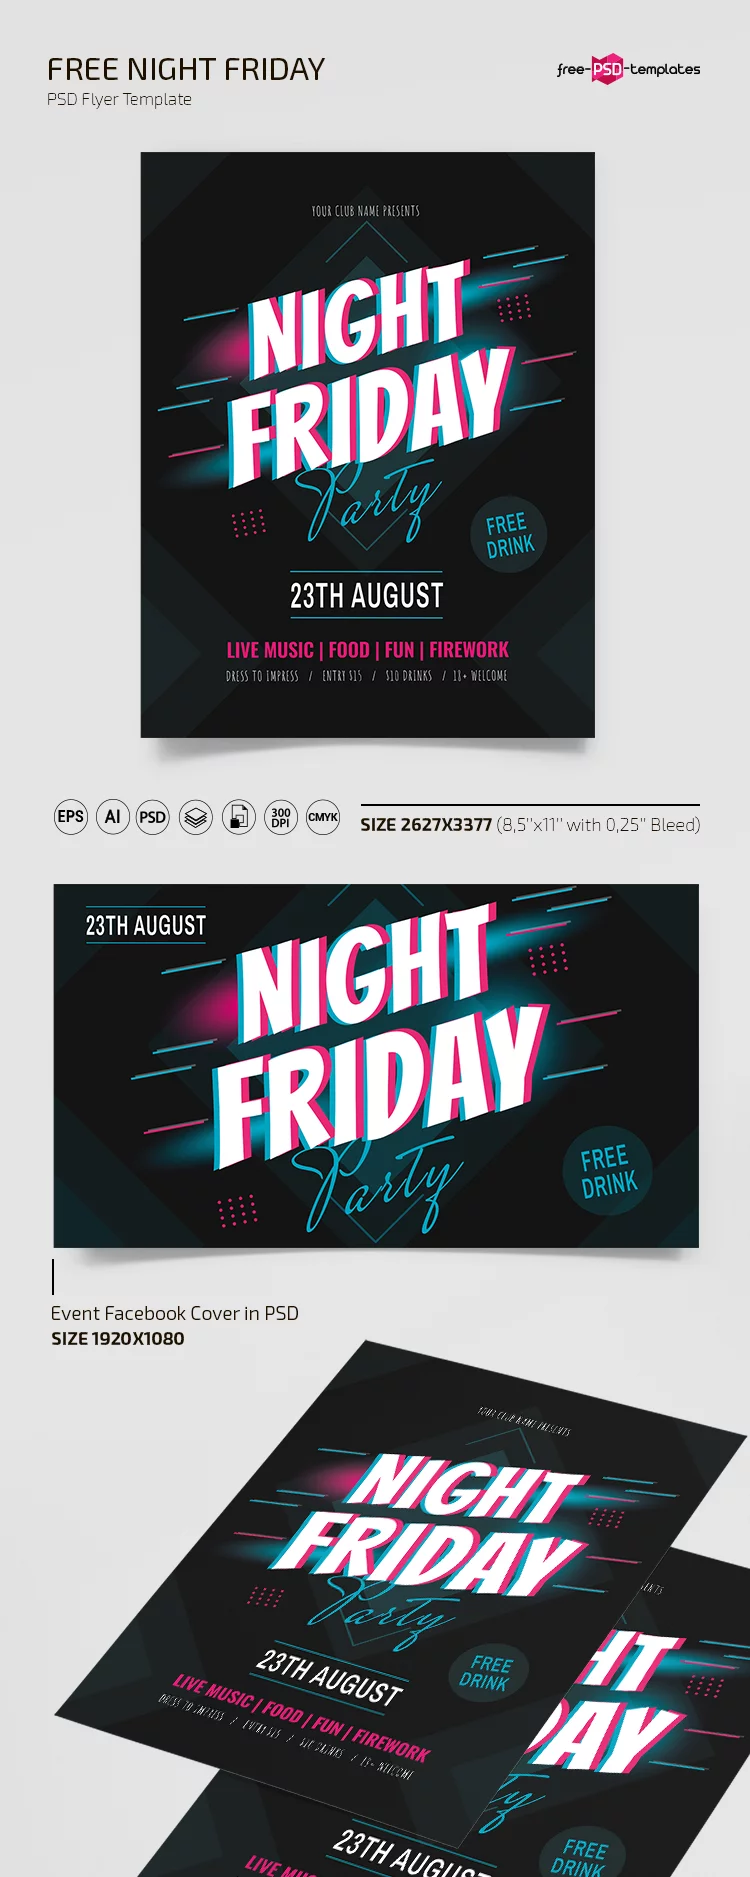 Free Night Friday Flyer Templates in PSD + Vector (.ai+.eps)